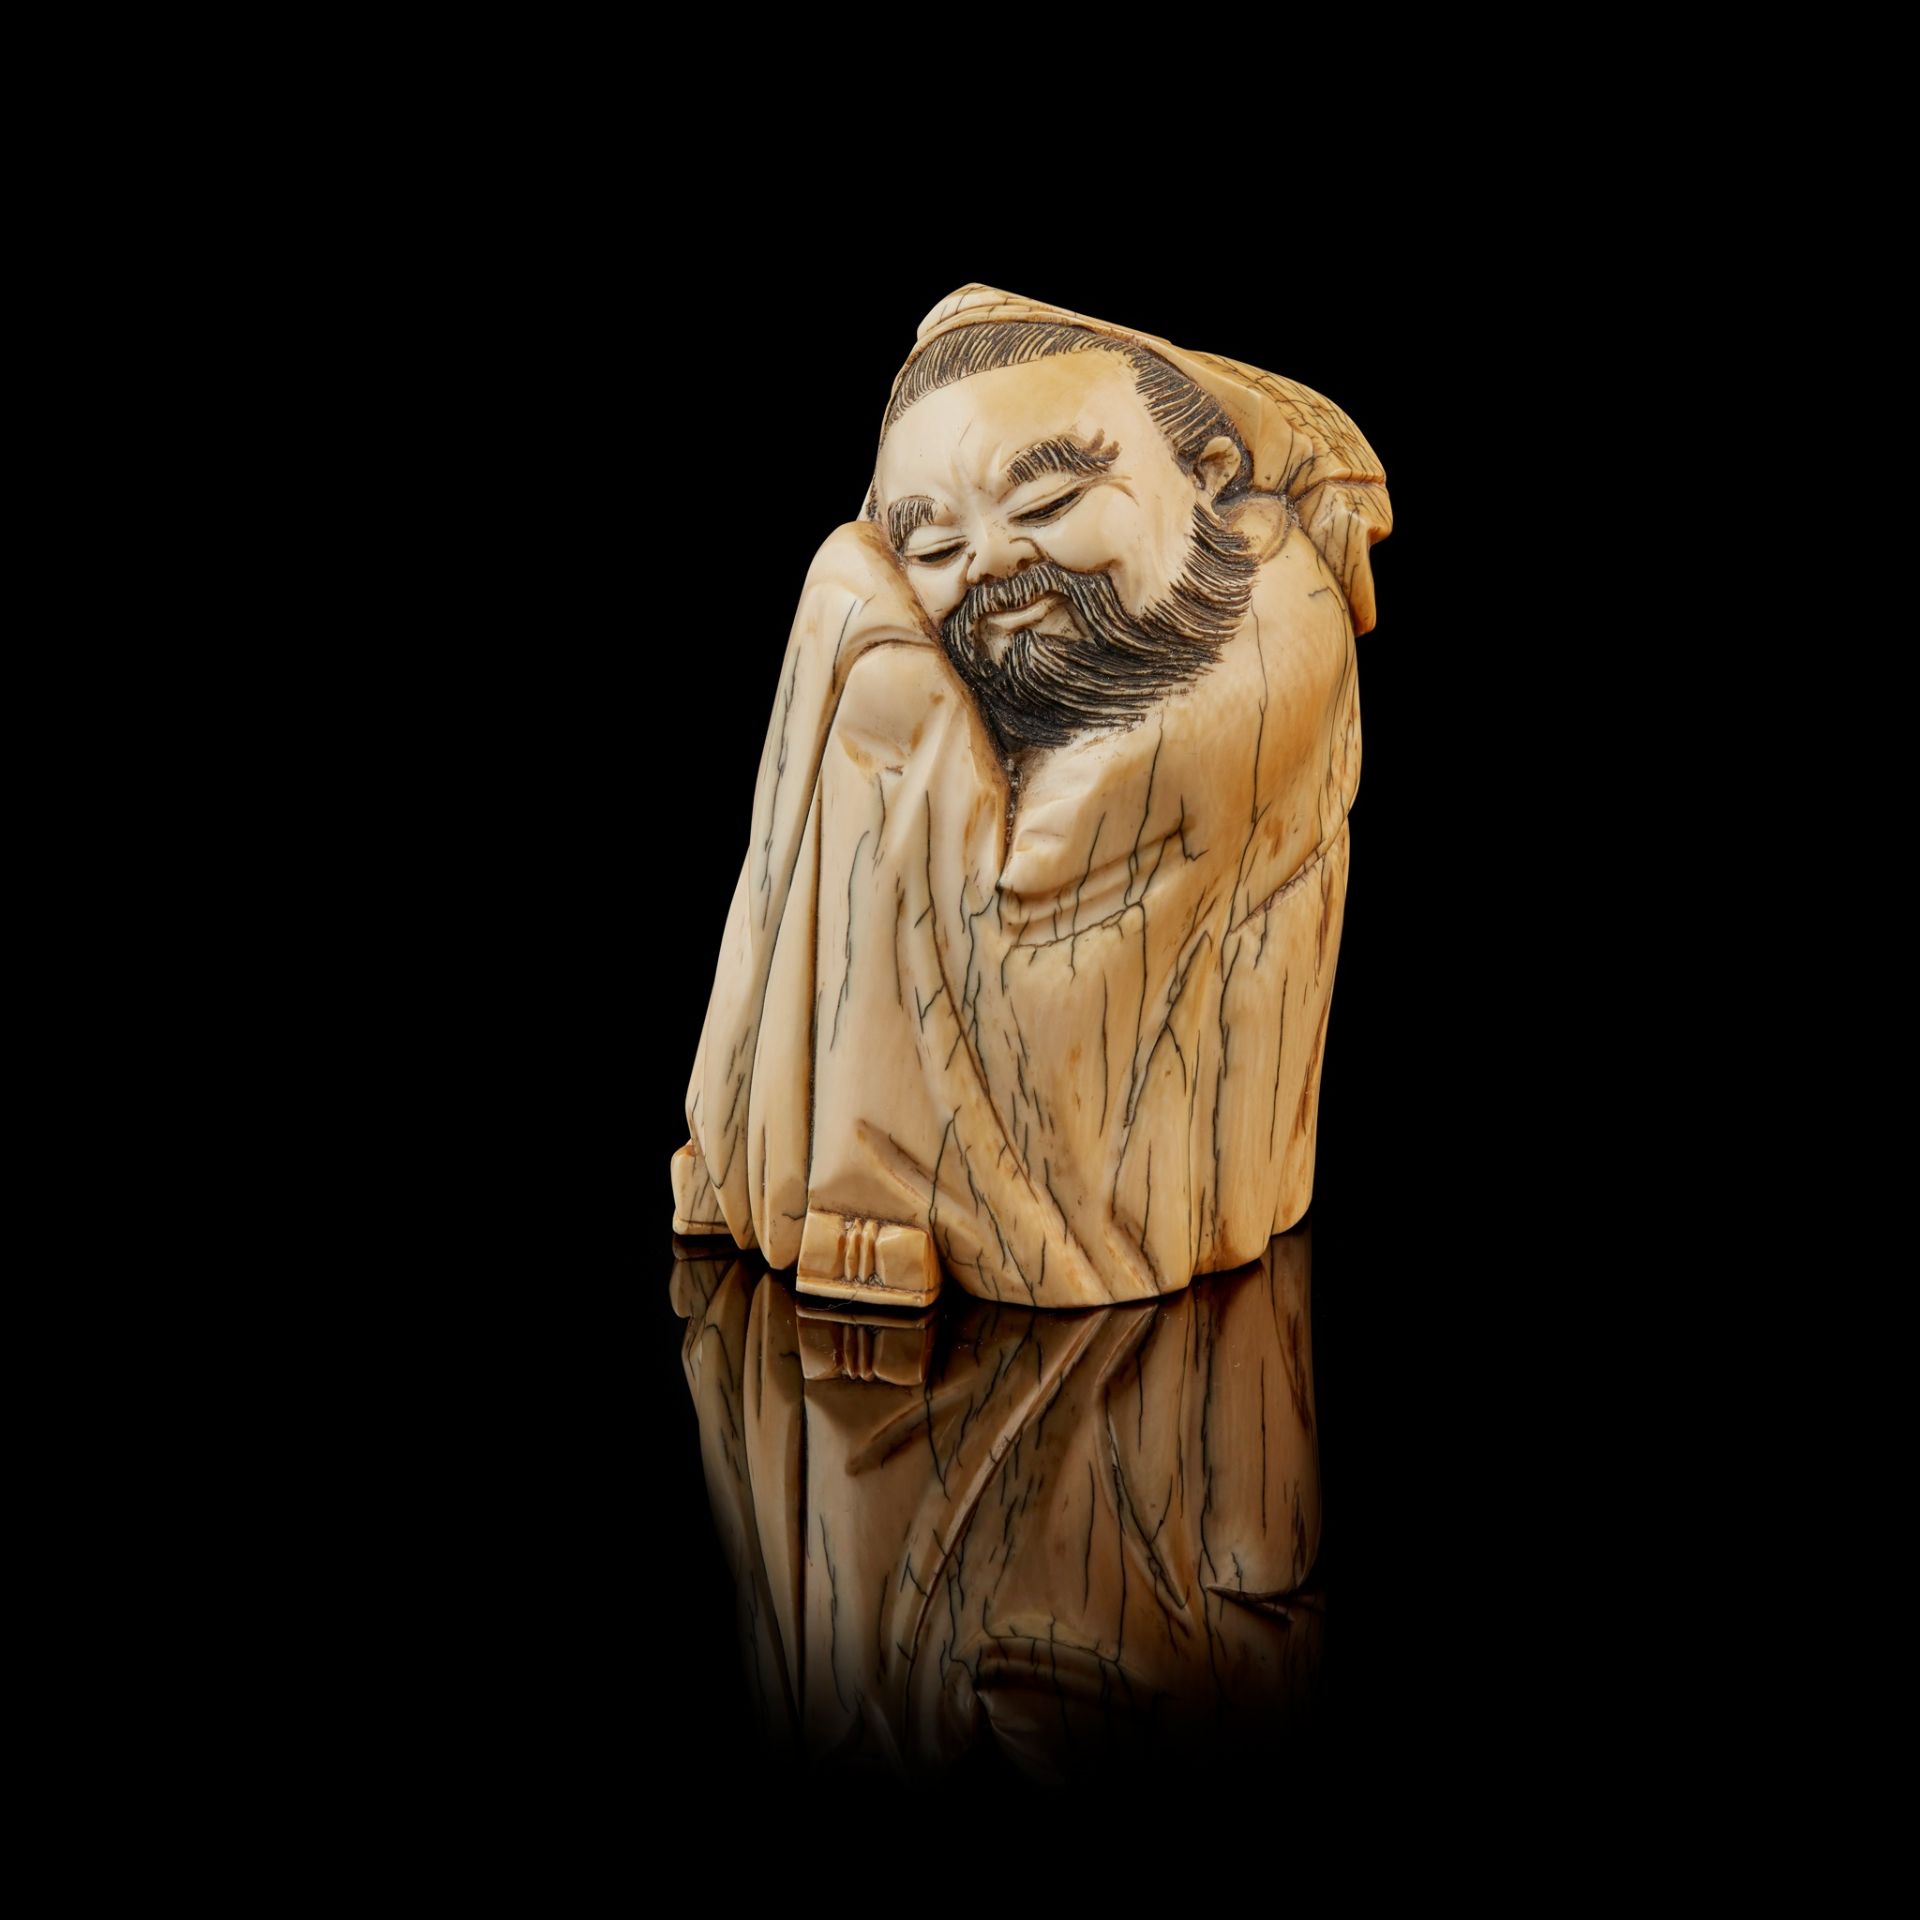 Y IVORY CARVING OF A NAPPING SCHOLAR MING TO QING DYNASTY, 17TH-18TH CENTURY